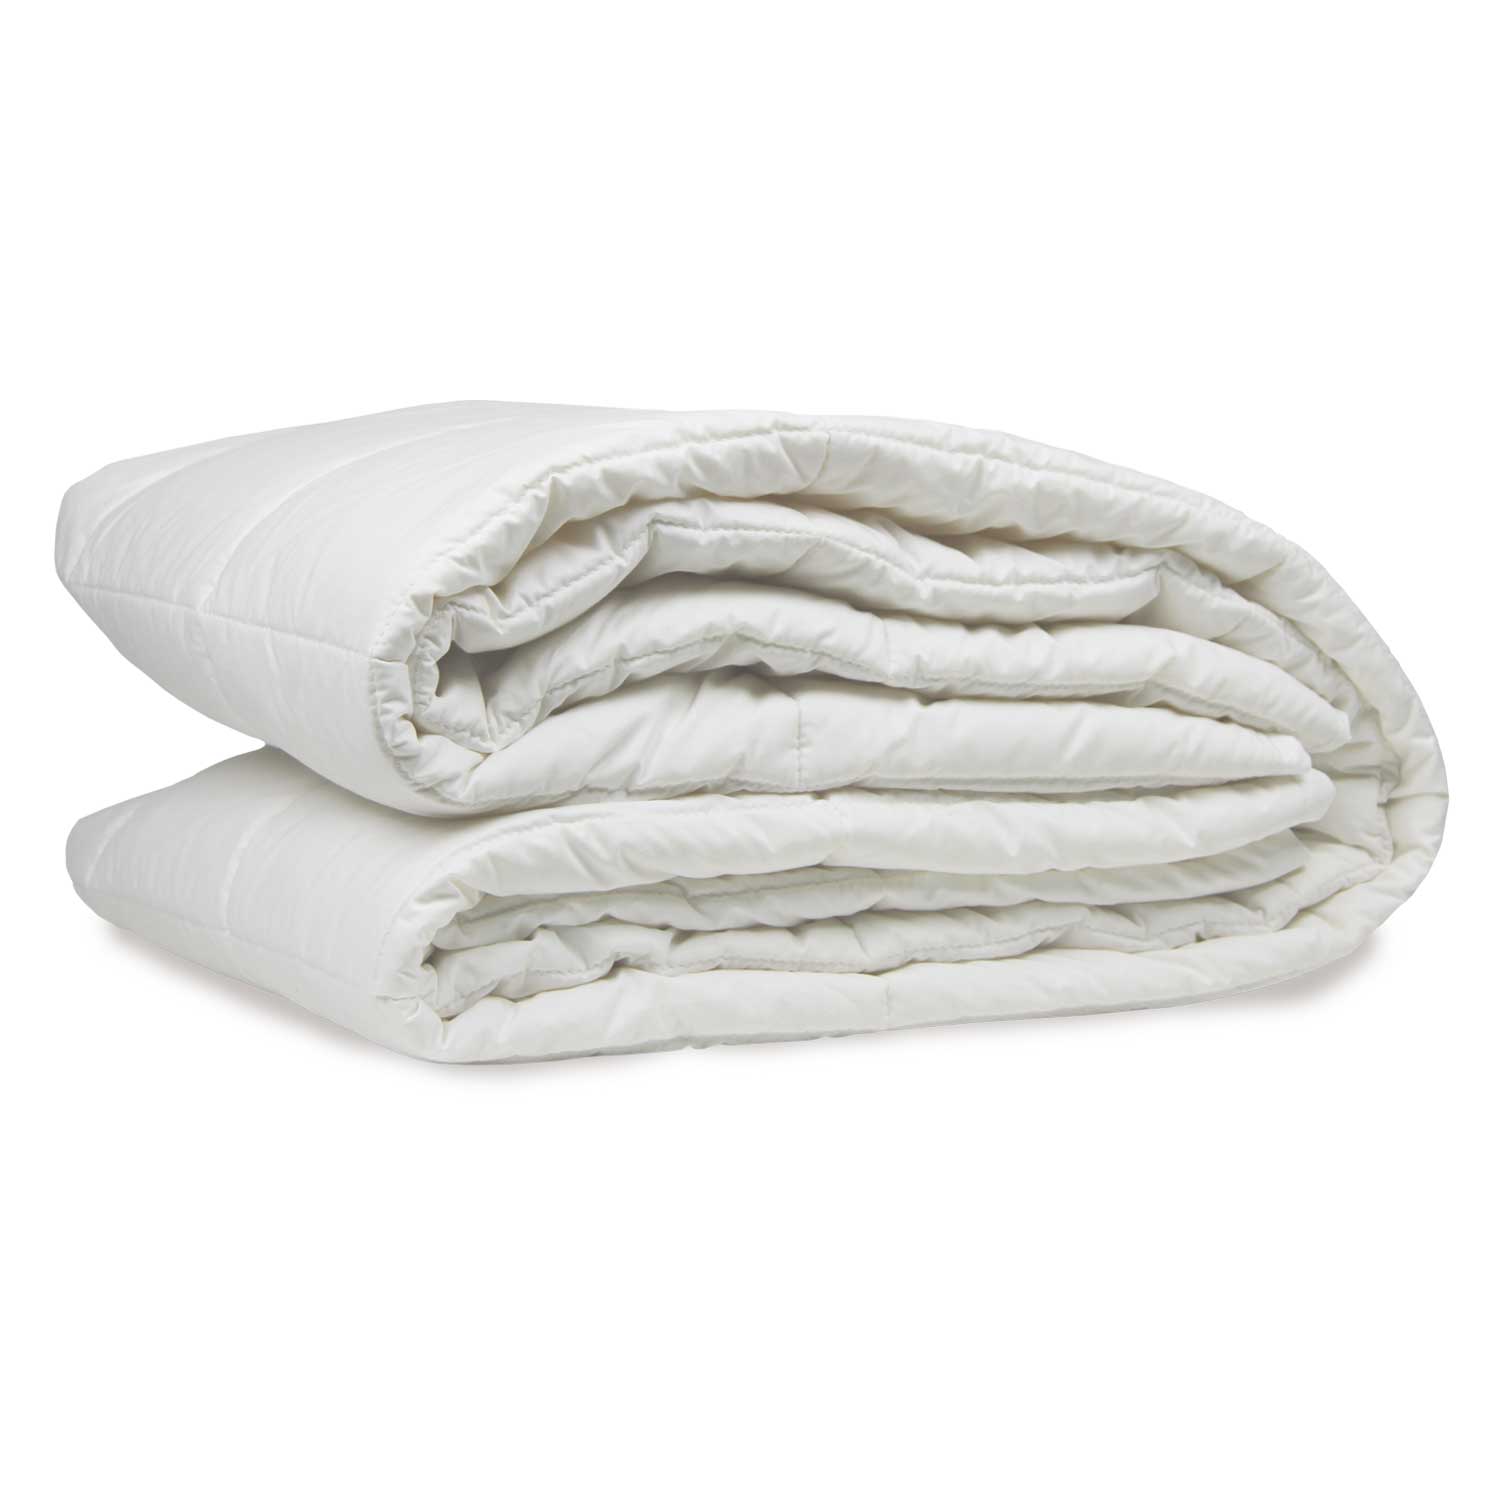 wool mattress protector double folded